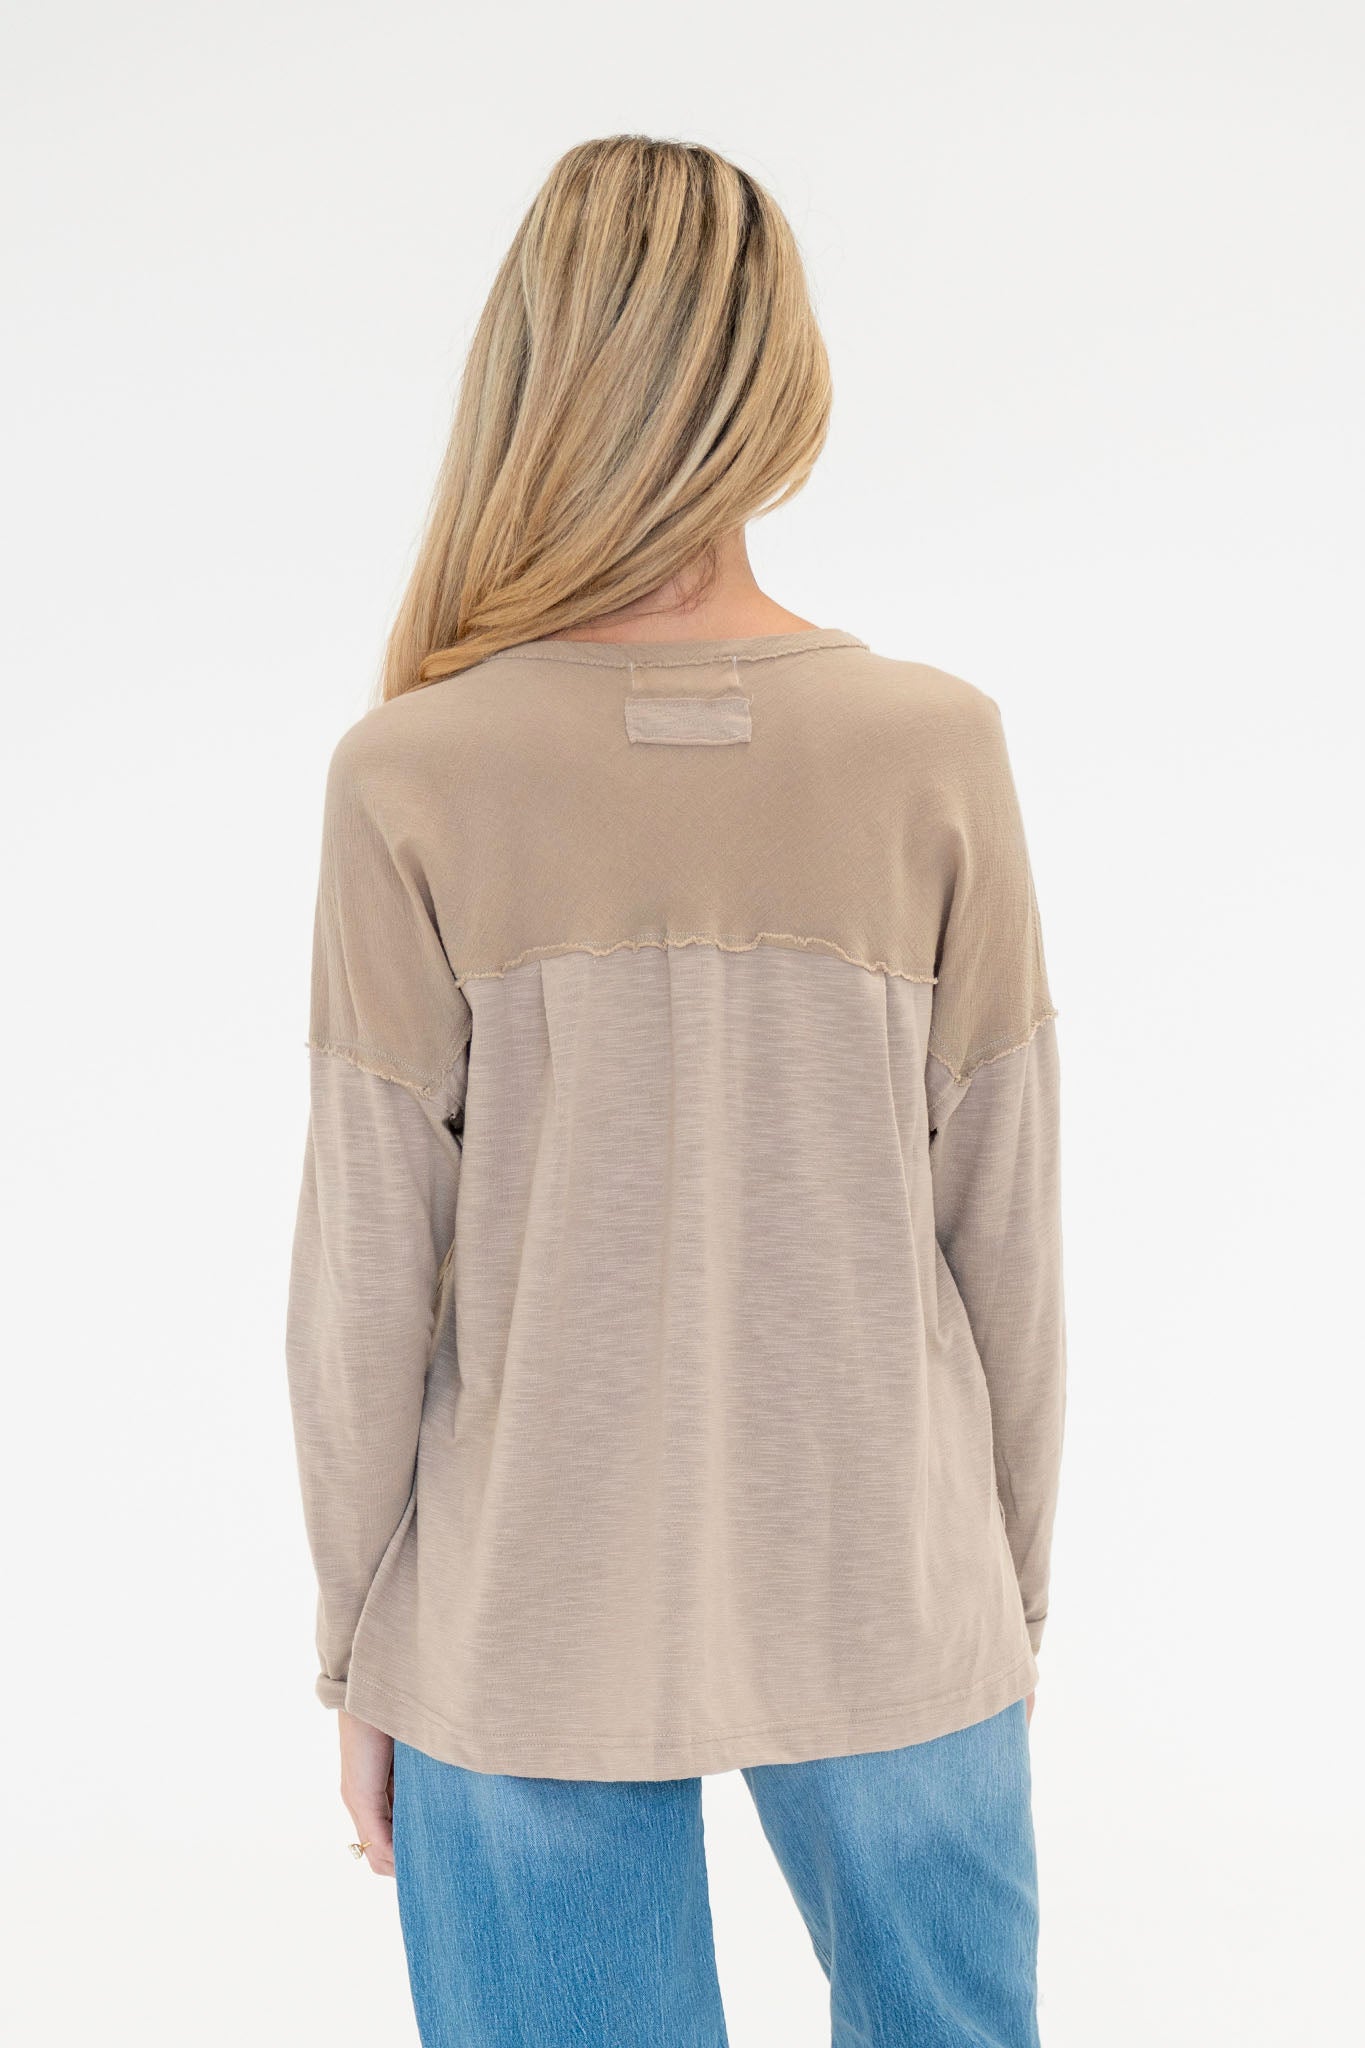 View 3 of Freesia Henley in Taupe, a Tops from Larrea Cove. Detail: .